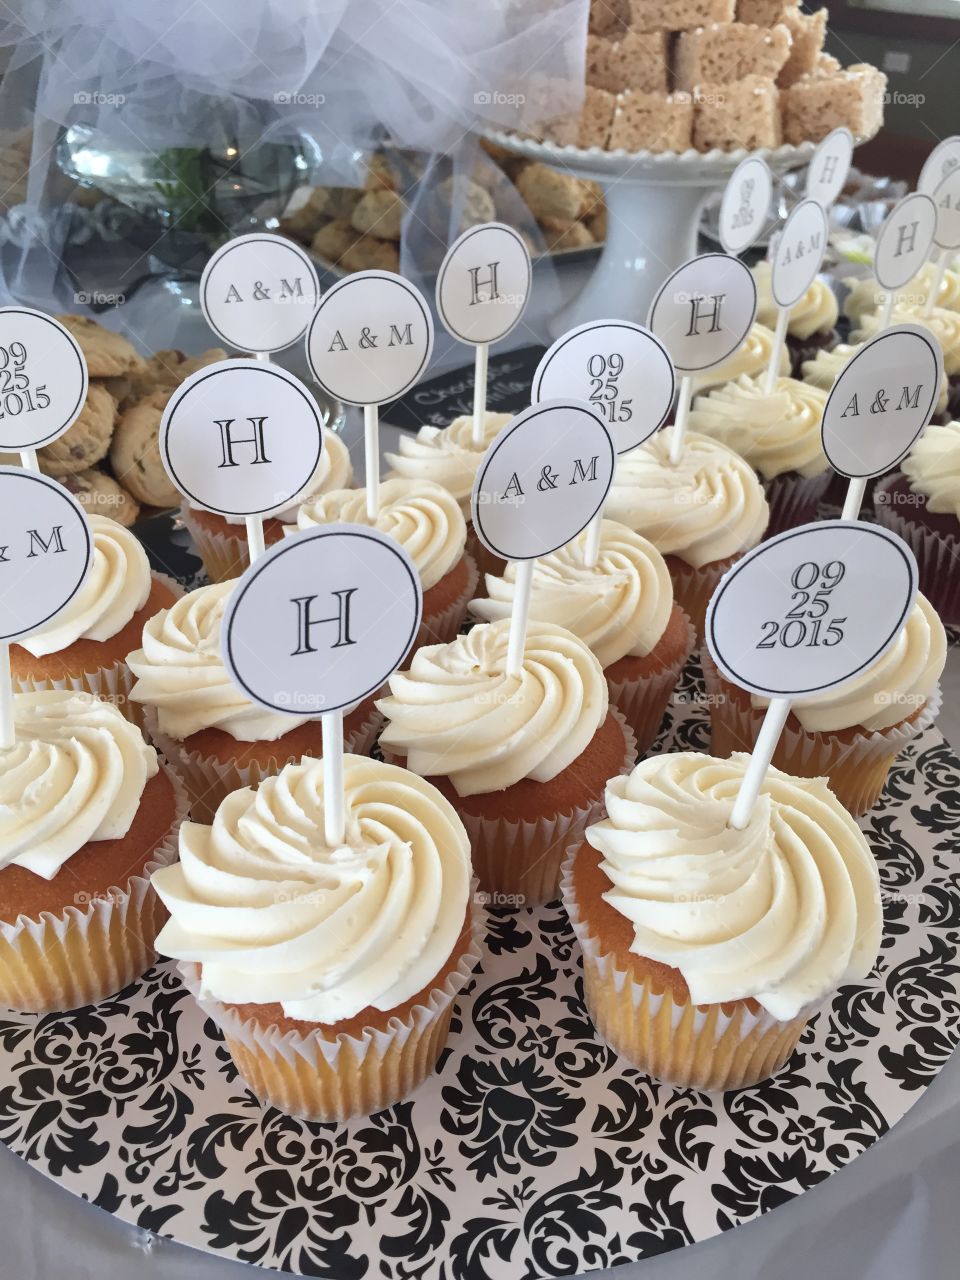 Bridal shower cupcakes. Pretty idea for bridal shower cupcakes